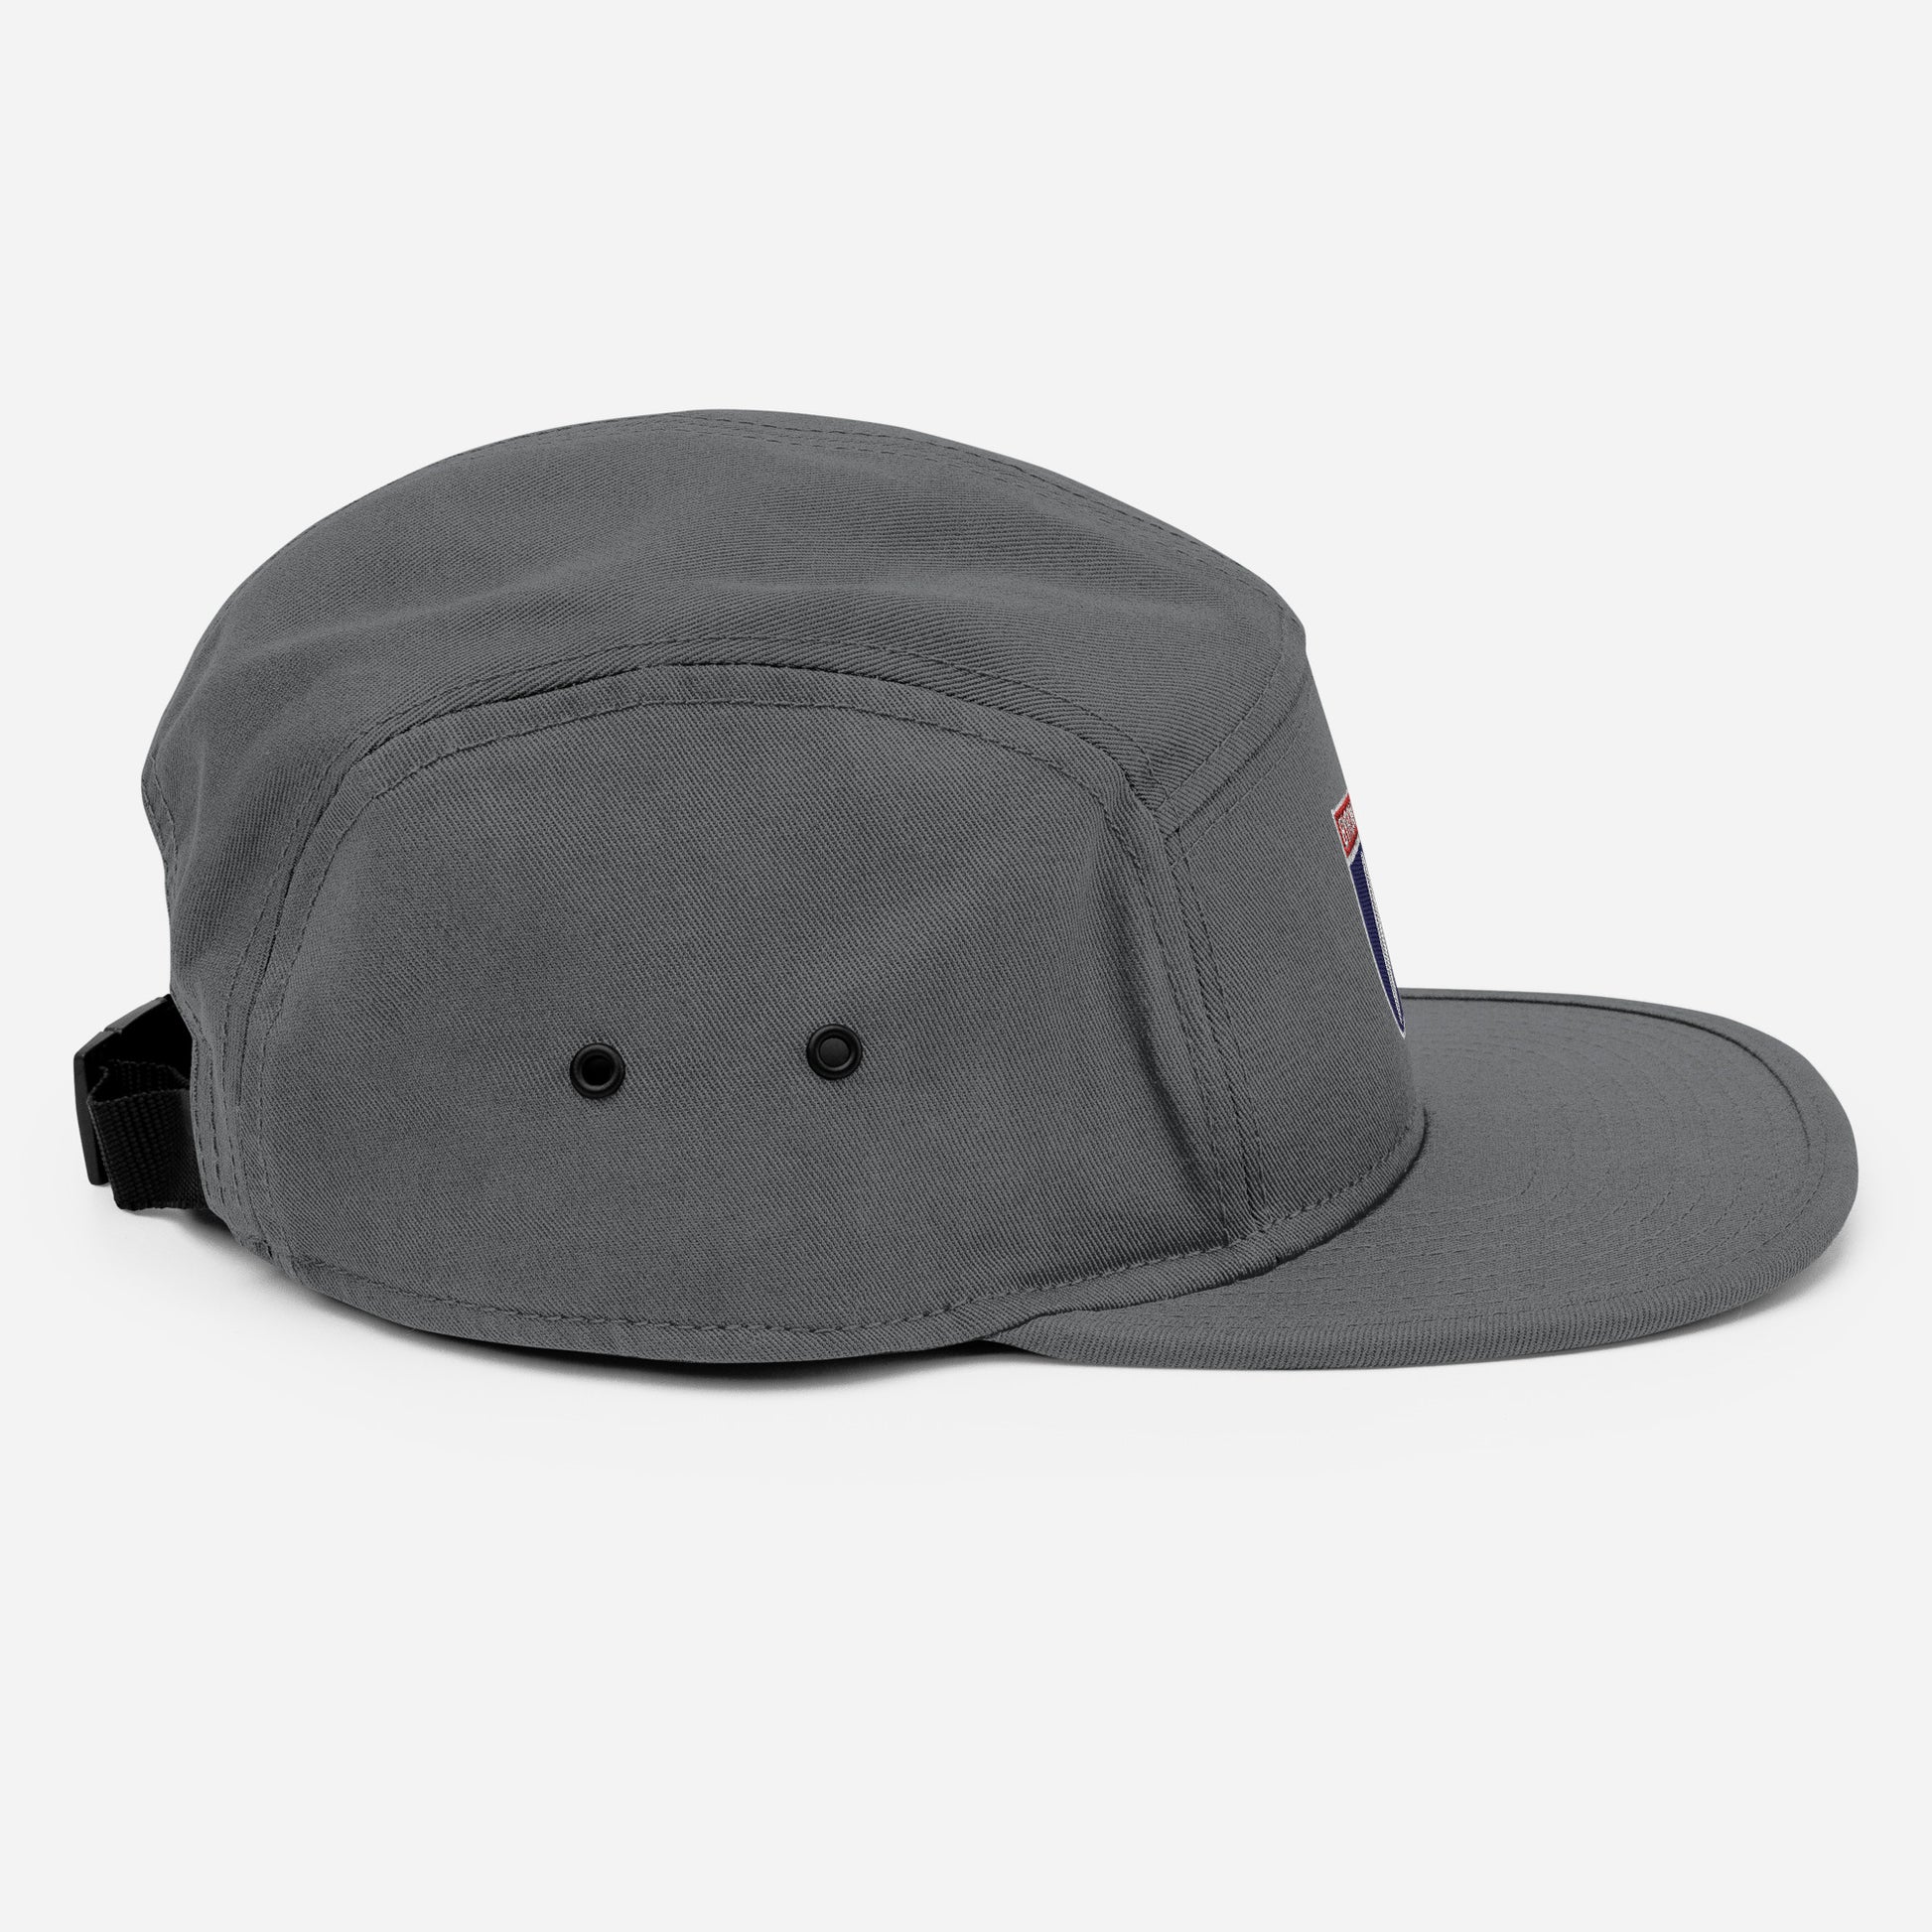  5 Panel Hat - Grey - Side view - With Byron Bay Vintage logo on front  - Genuine Byron Bay Merchandise | Produced by Go Sea Kayak Byron Bay 